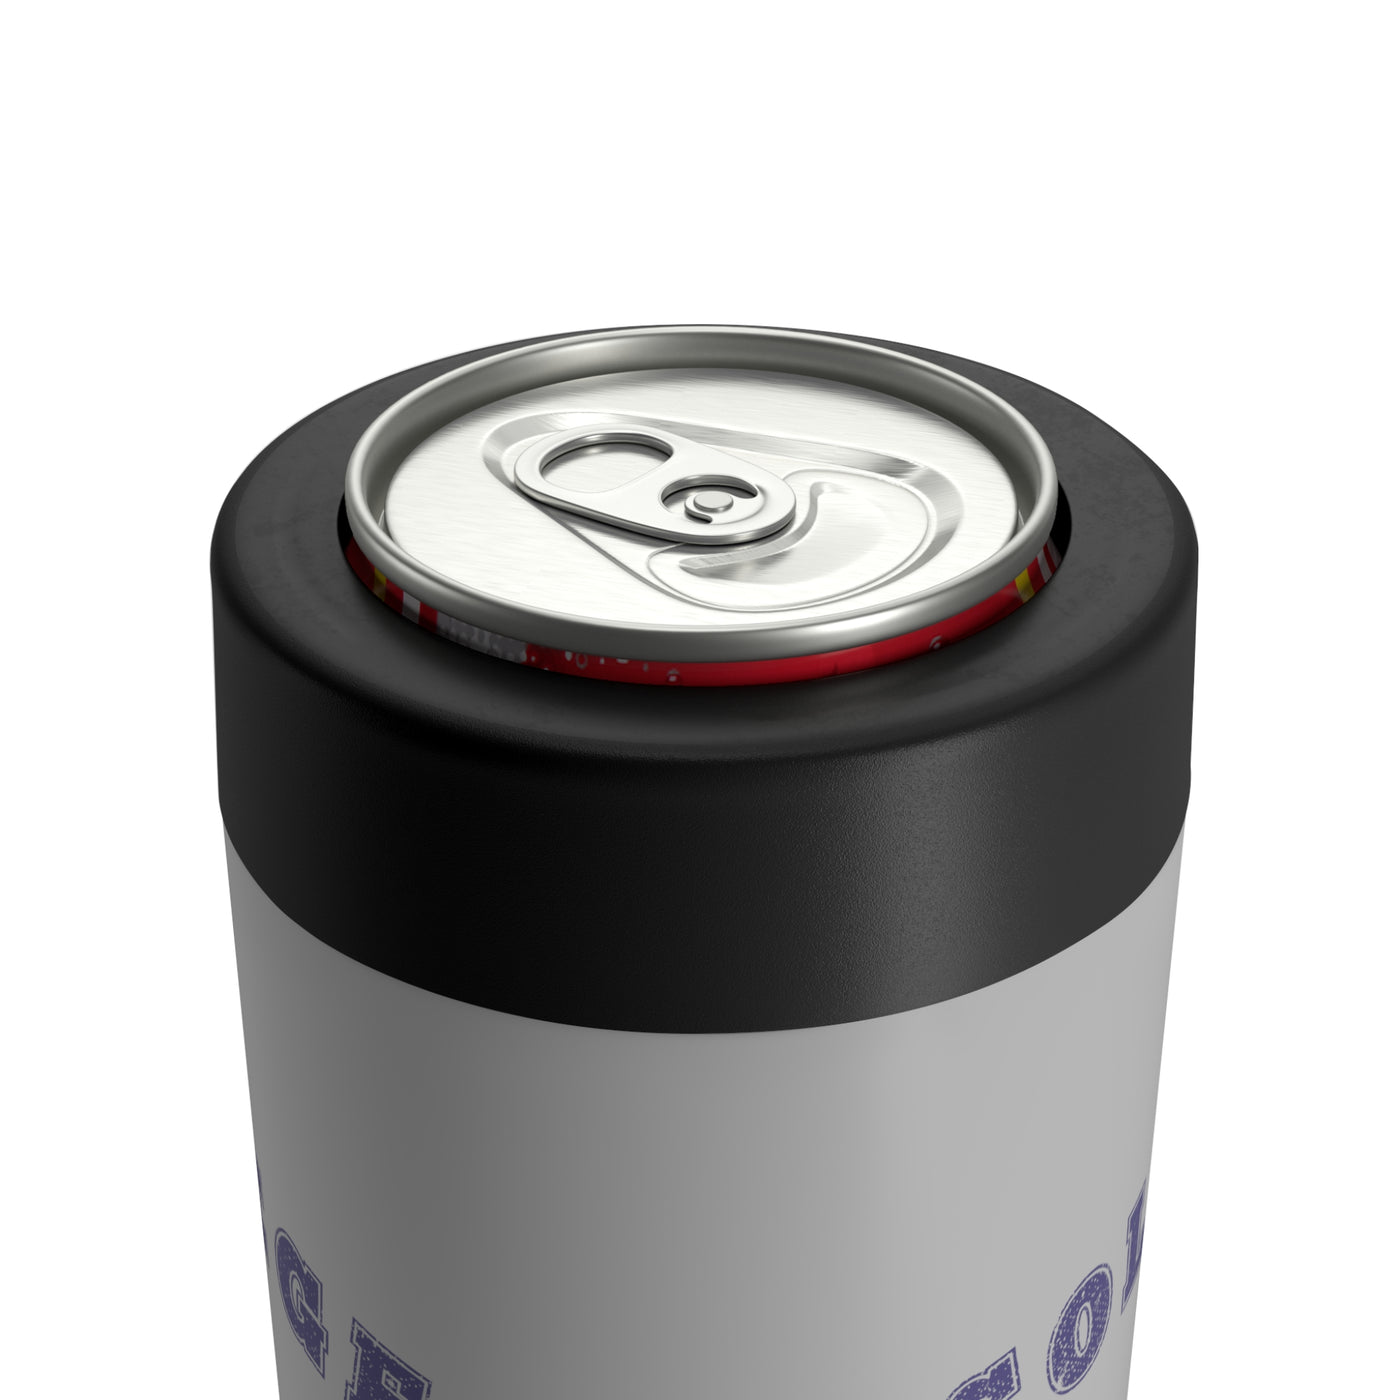 College Stainless Steel Can Holder